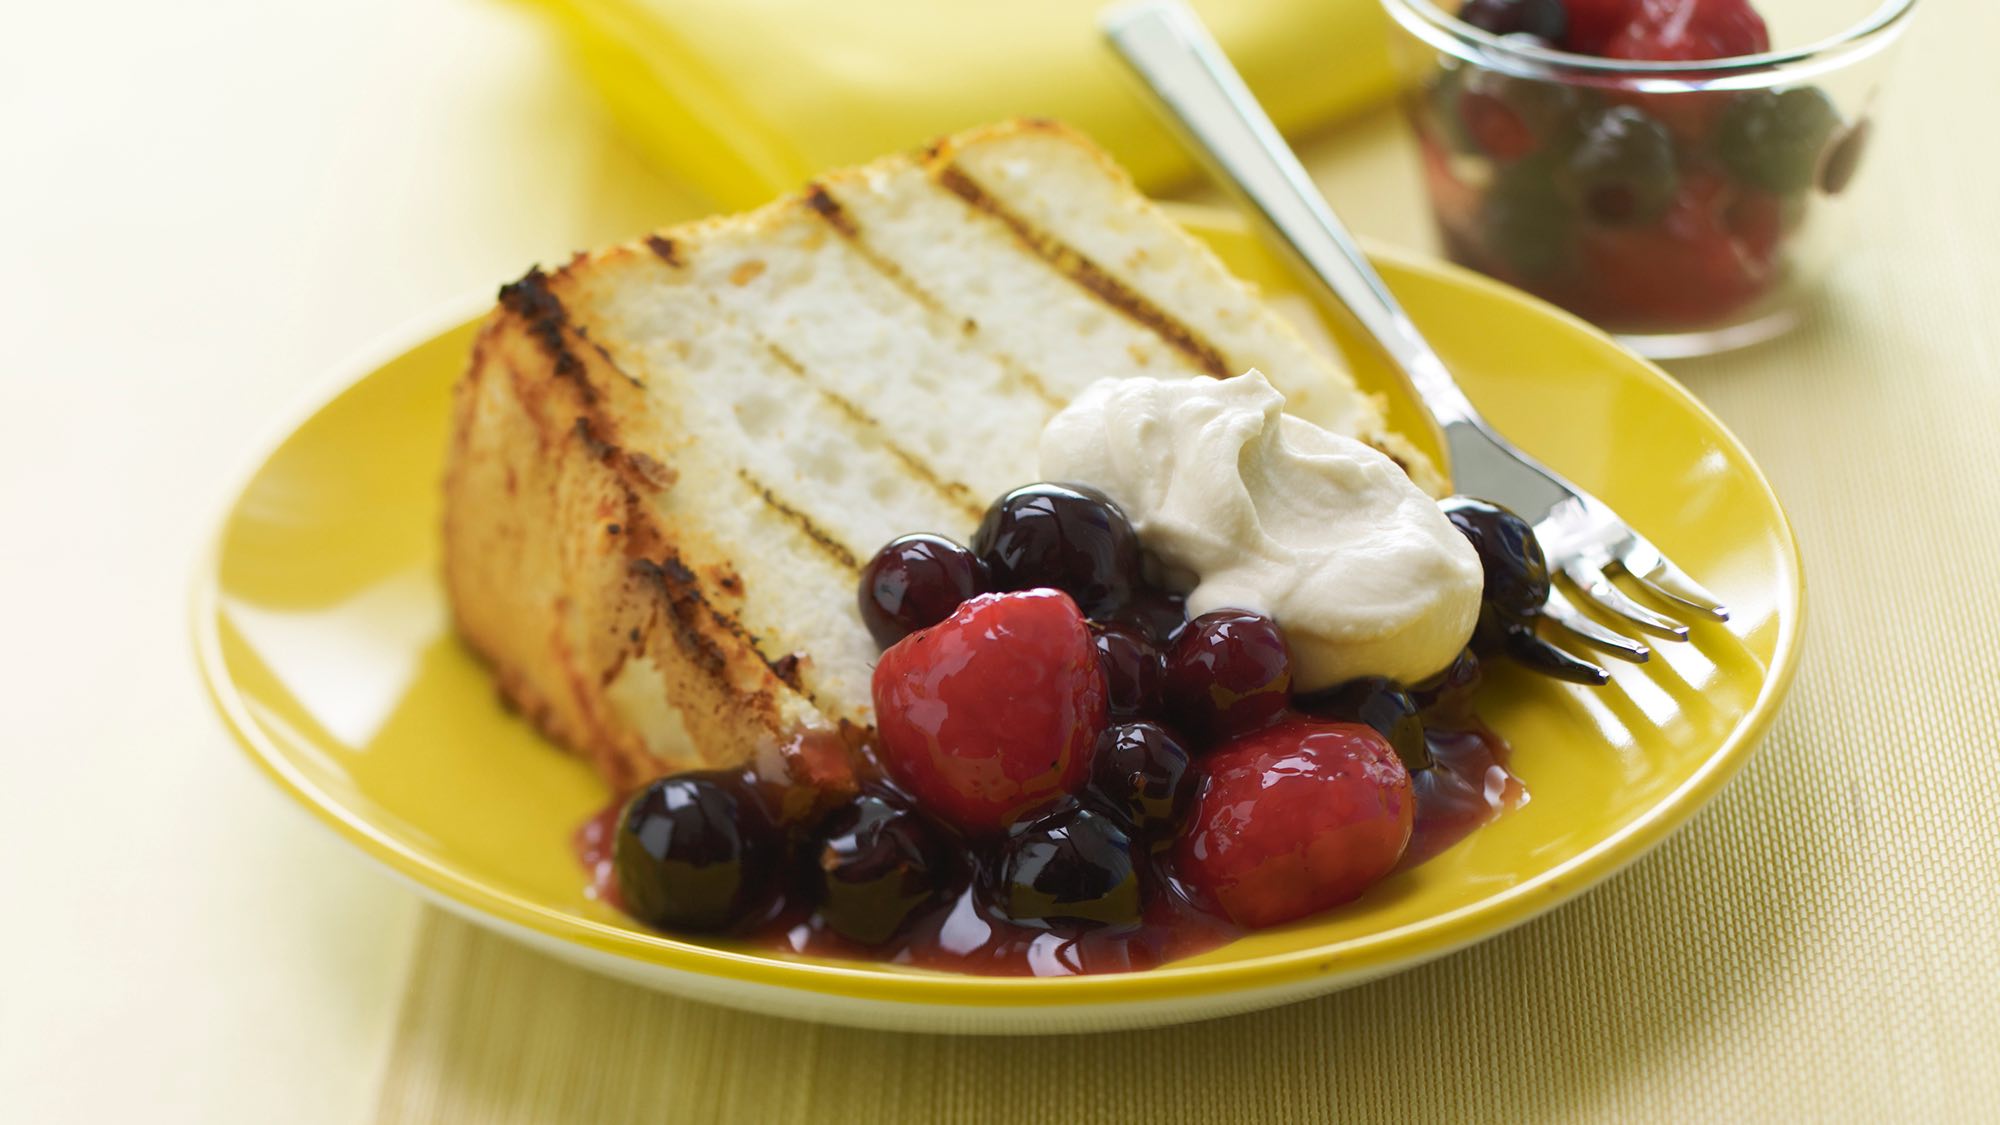 McCormick Grilled Angel Food Cake with Peppered Berries and Vanilla Cream